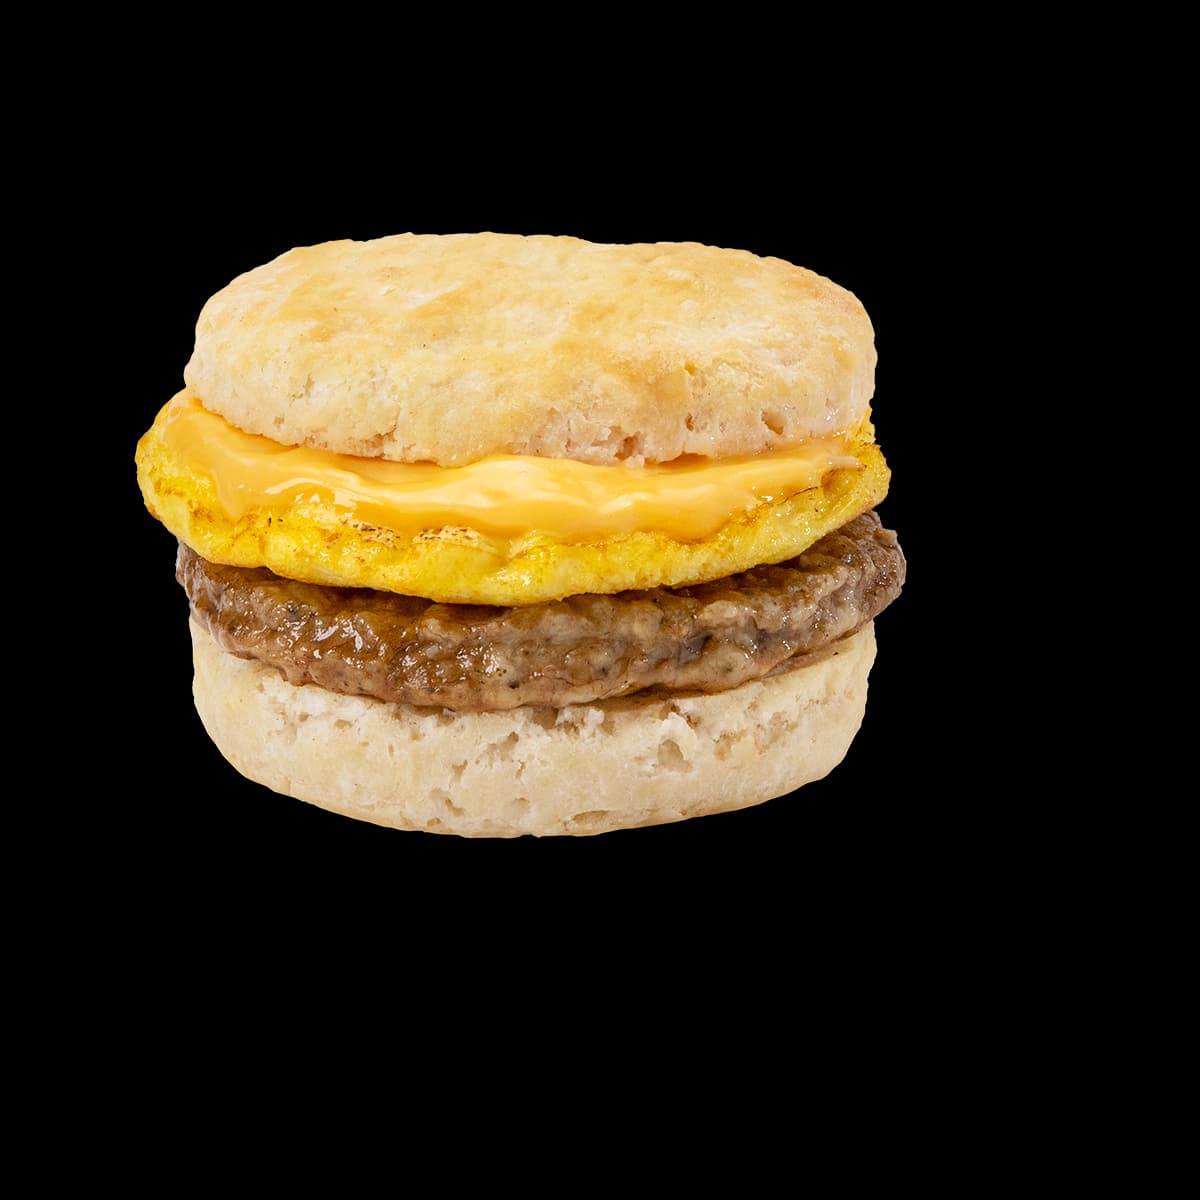 Jimmy Dean Sausage Egg and Cheese Biscuit